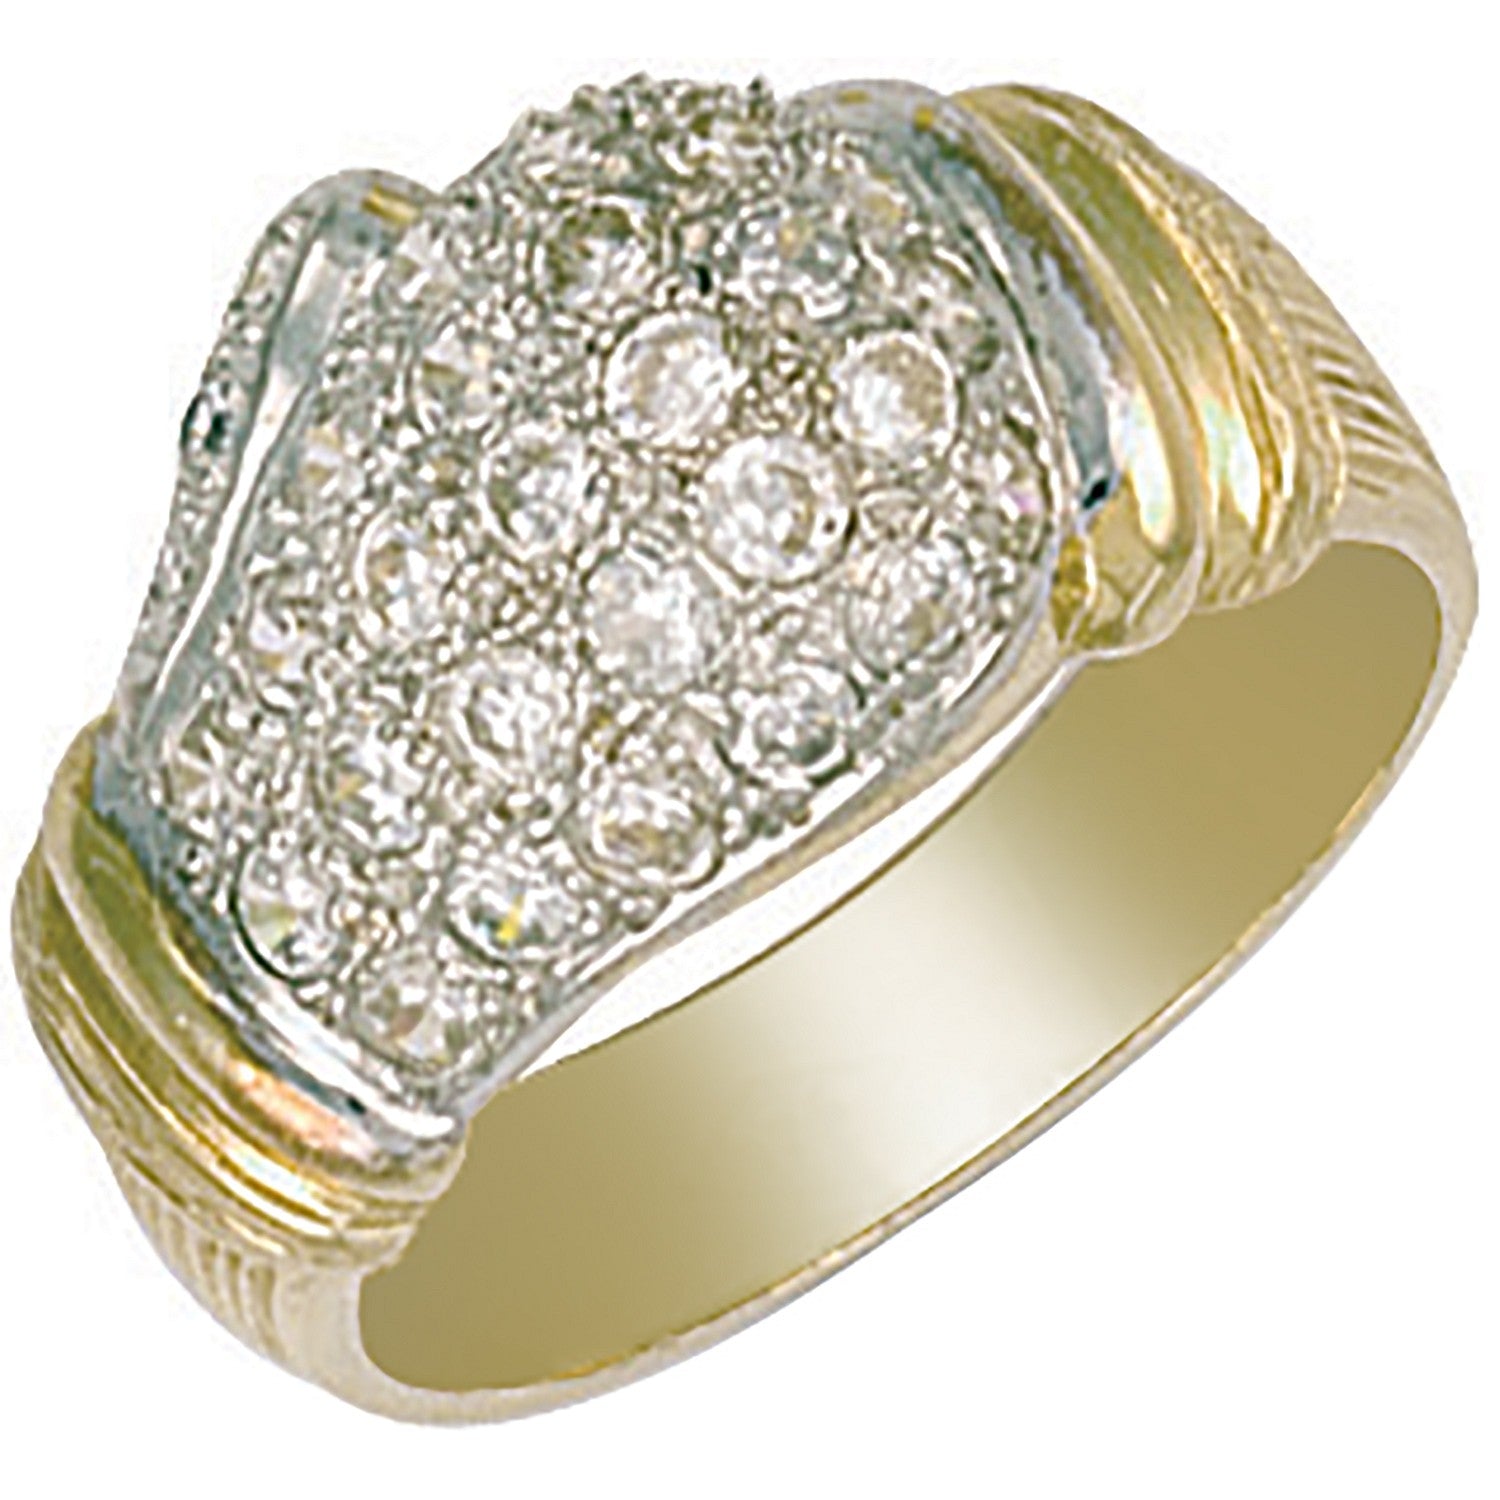 9ct Cz Boxing Glove Ring 111084 - FJewellery